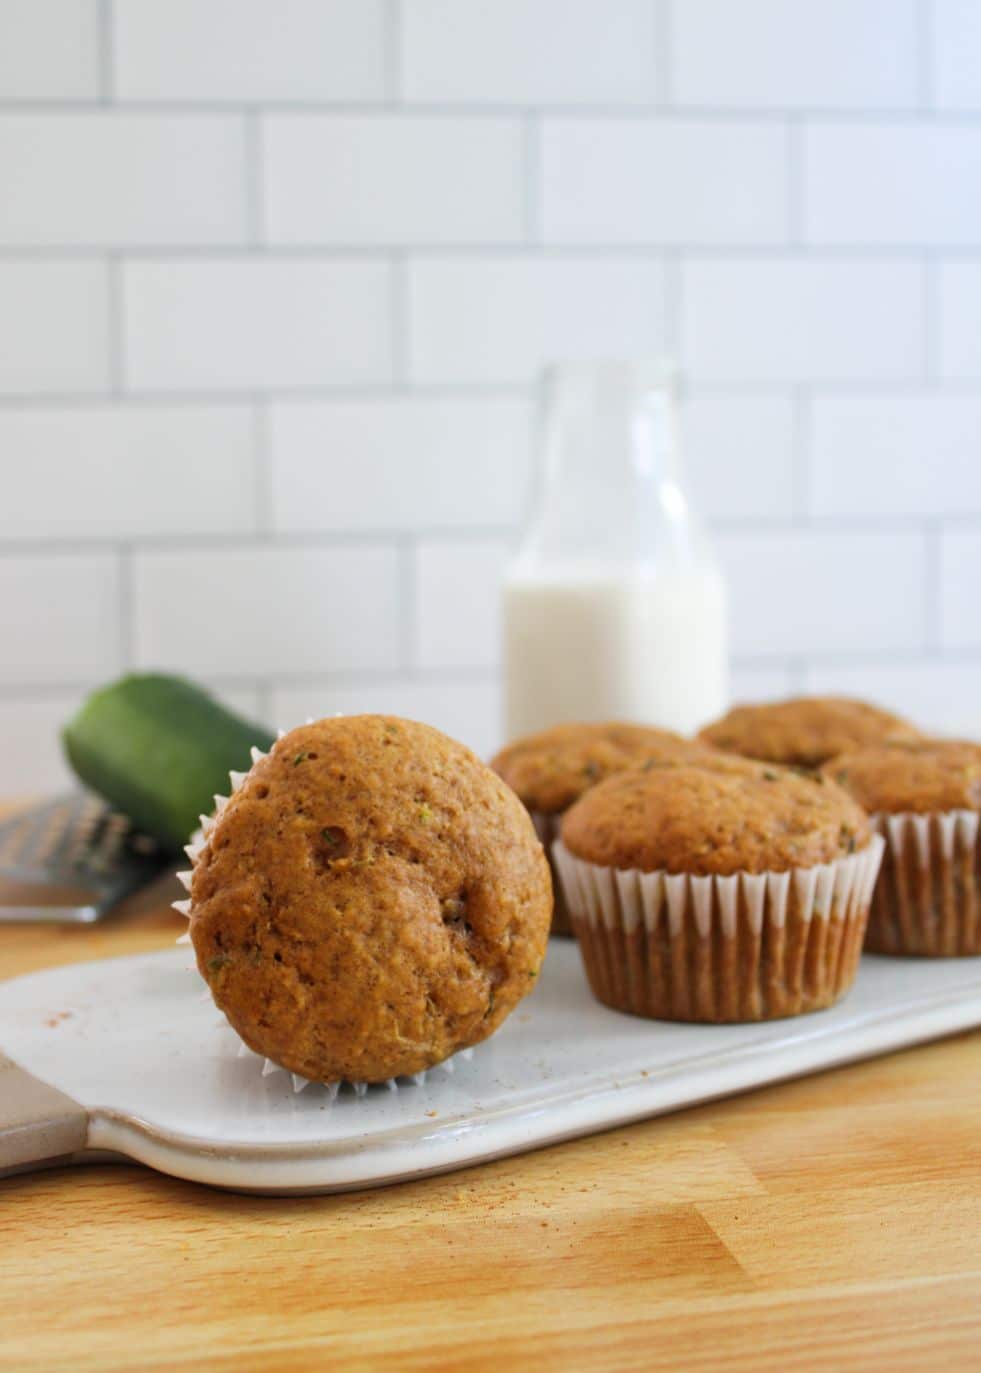 A zucchini muffin lying on its side on a white platter with a jug of milk in the background